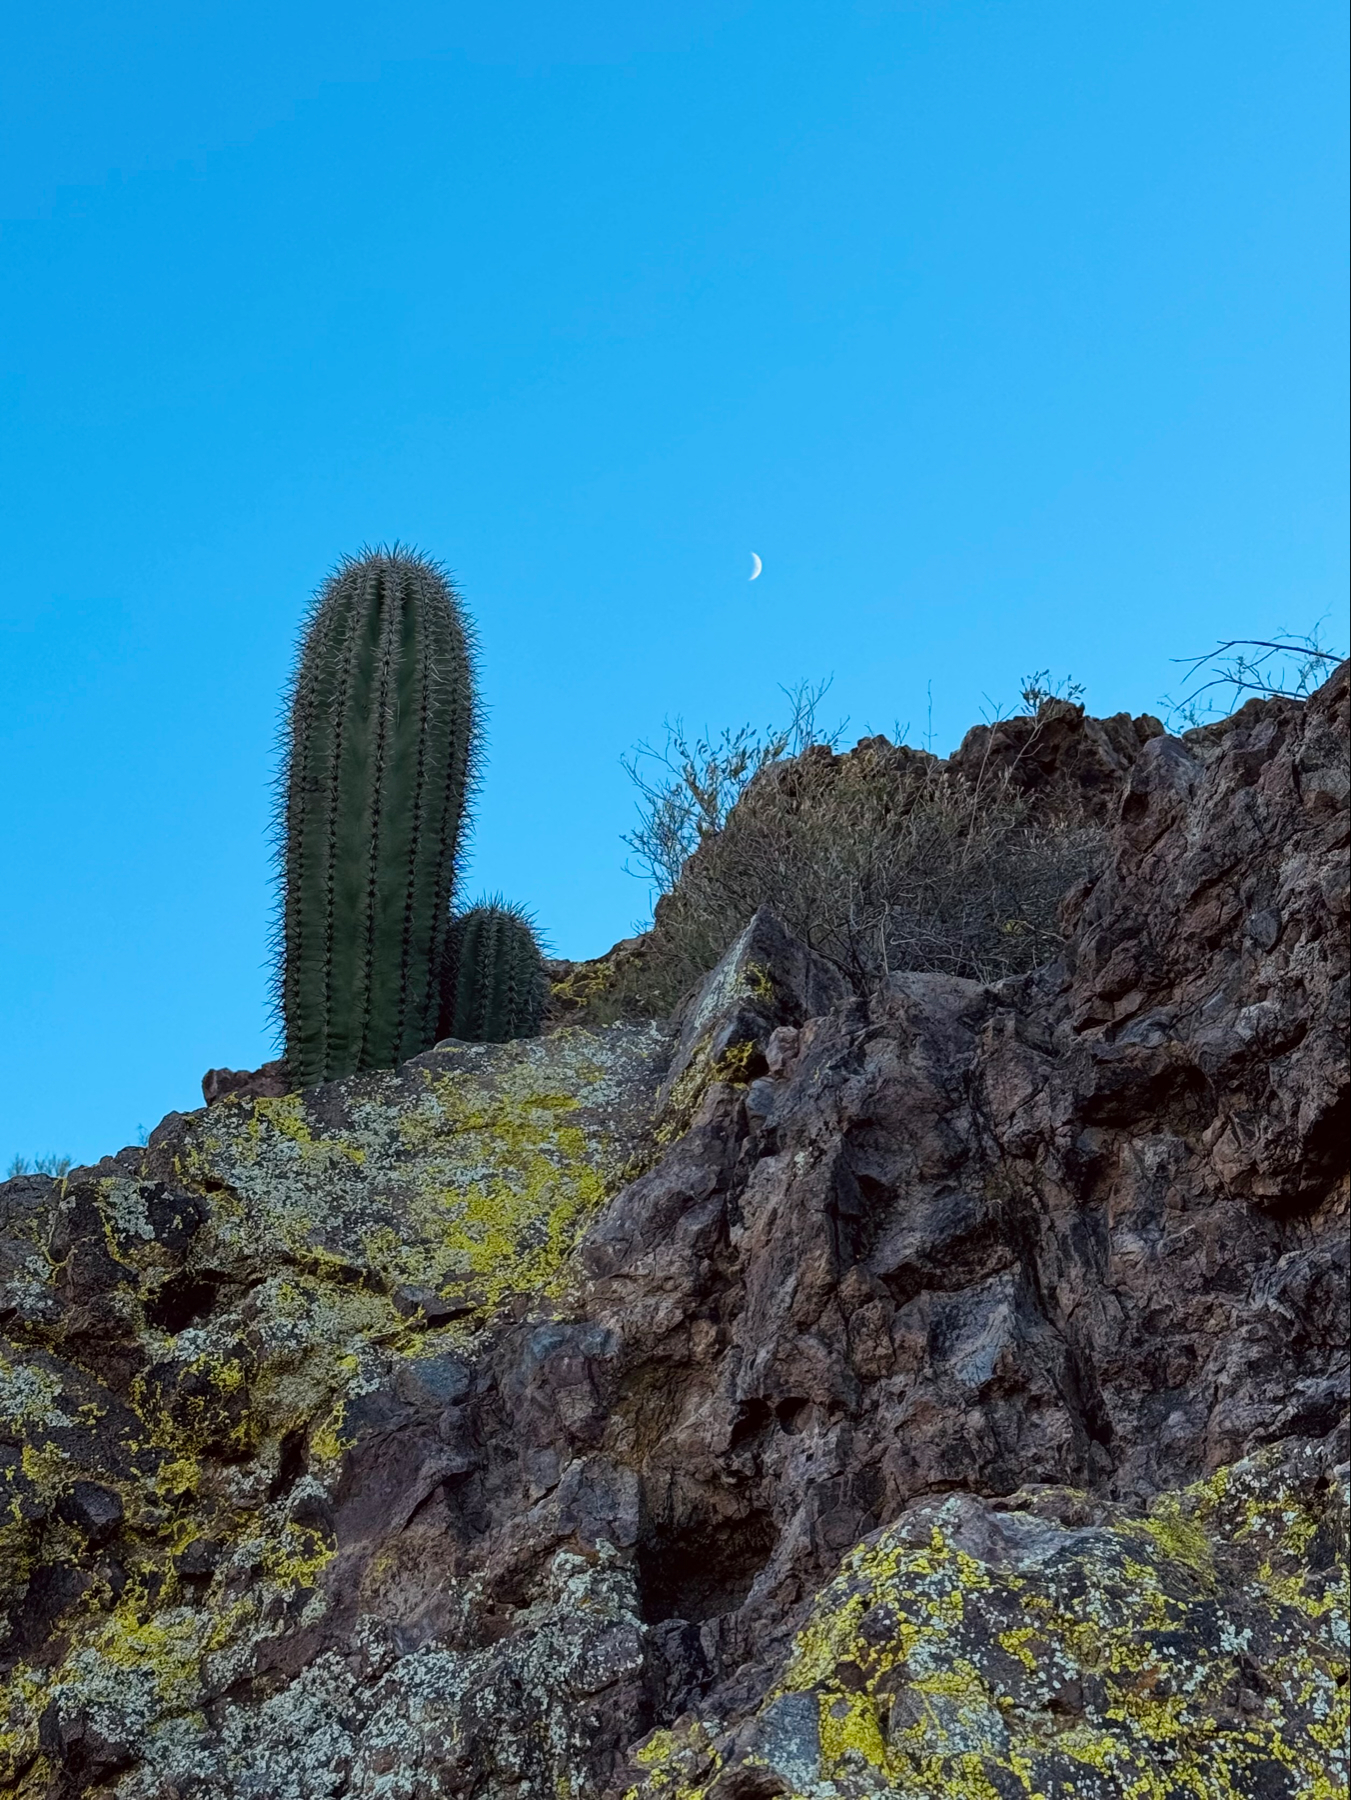 Rocky terrain with vibrant lichen, a single tall saguaro cactus, and a crescent moon in the blue sky.